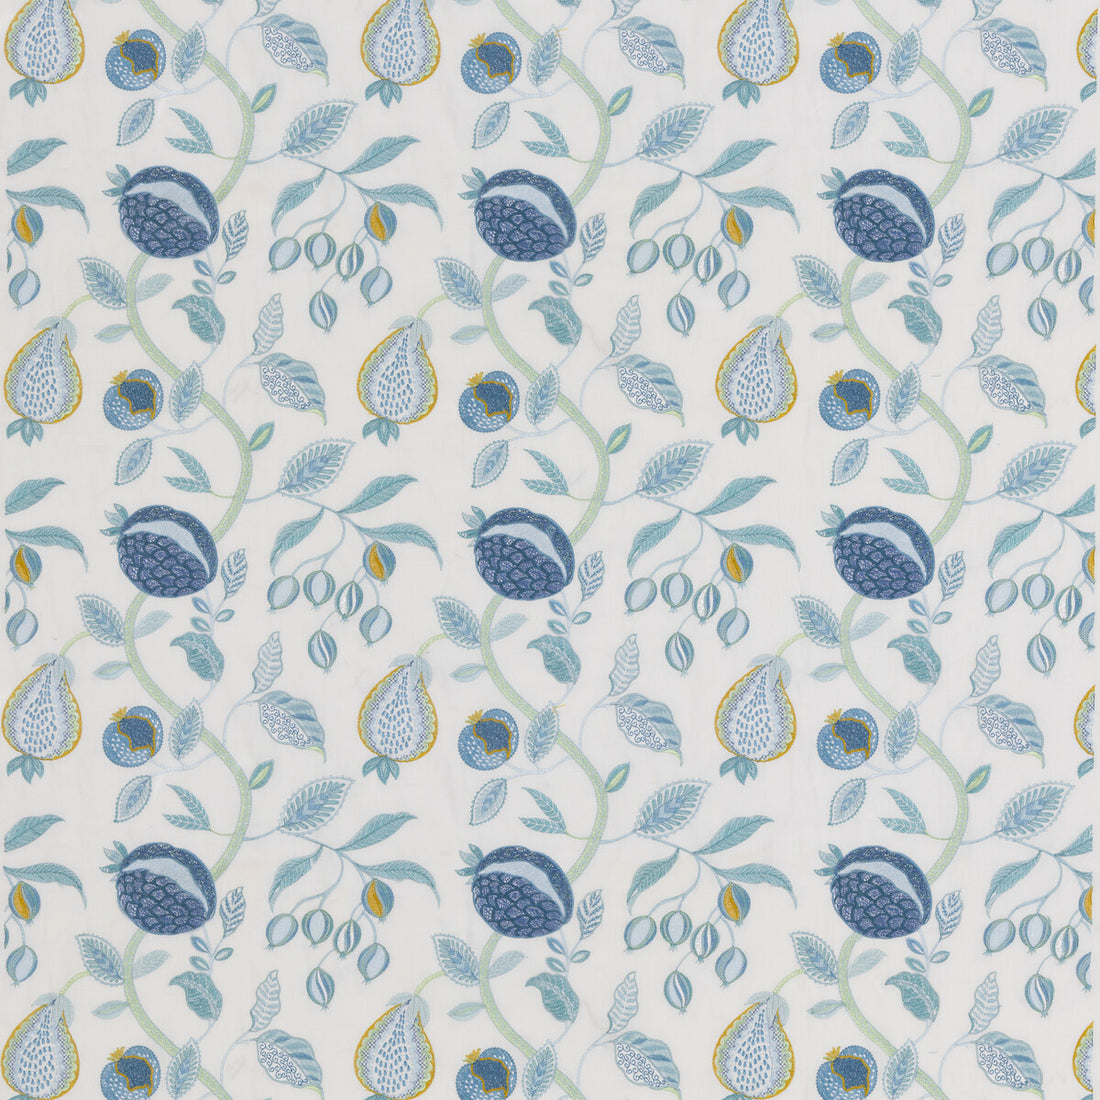 Kelling fabric in aqua color - pattern BF11024.2.0 - by G P &amp; J Baker in the Burford collection